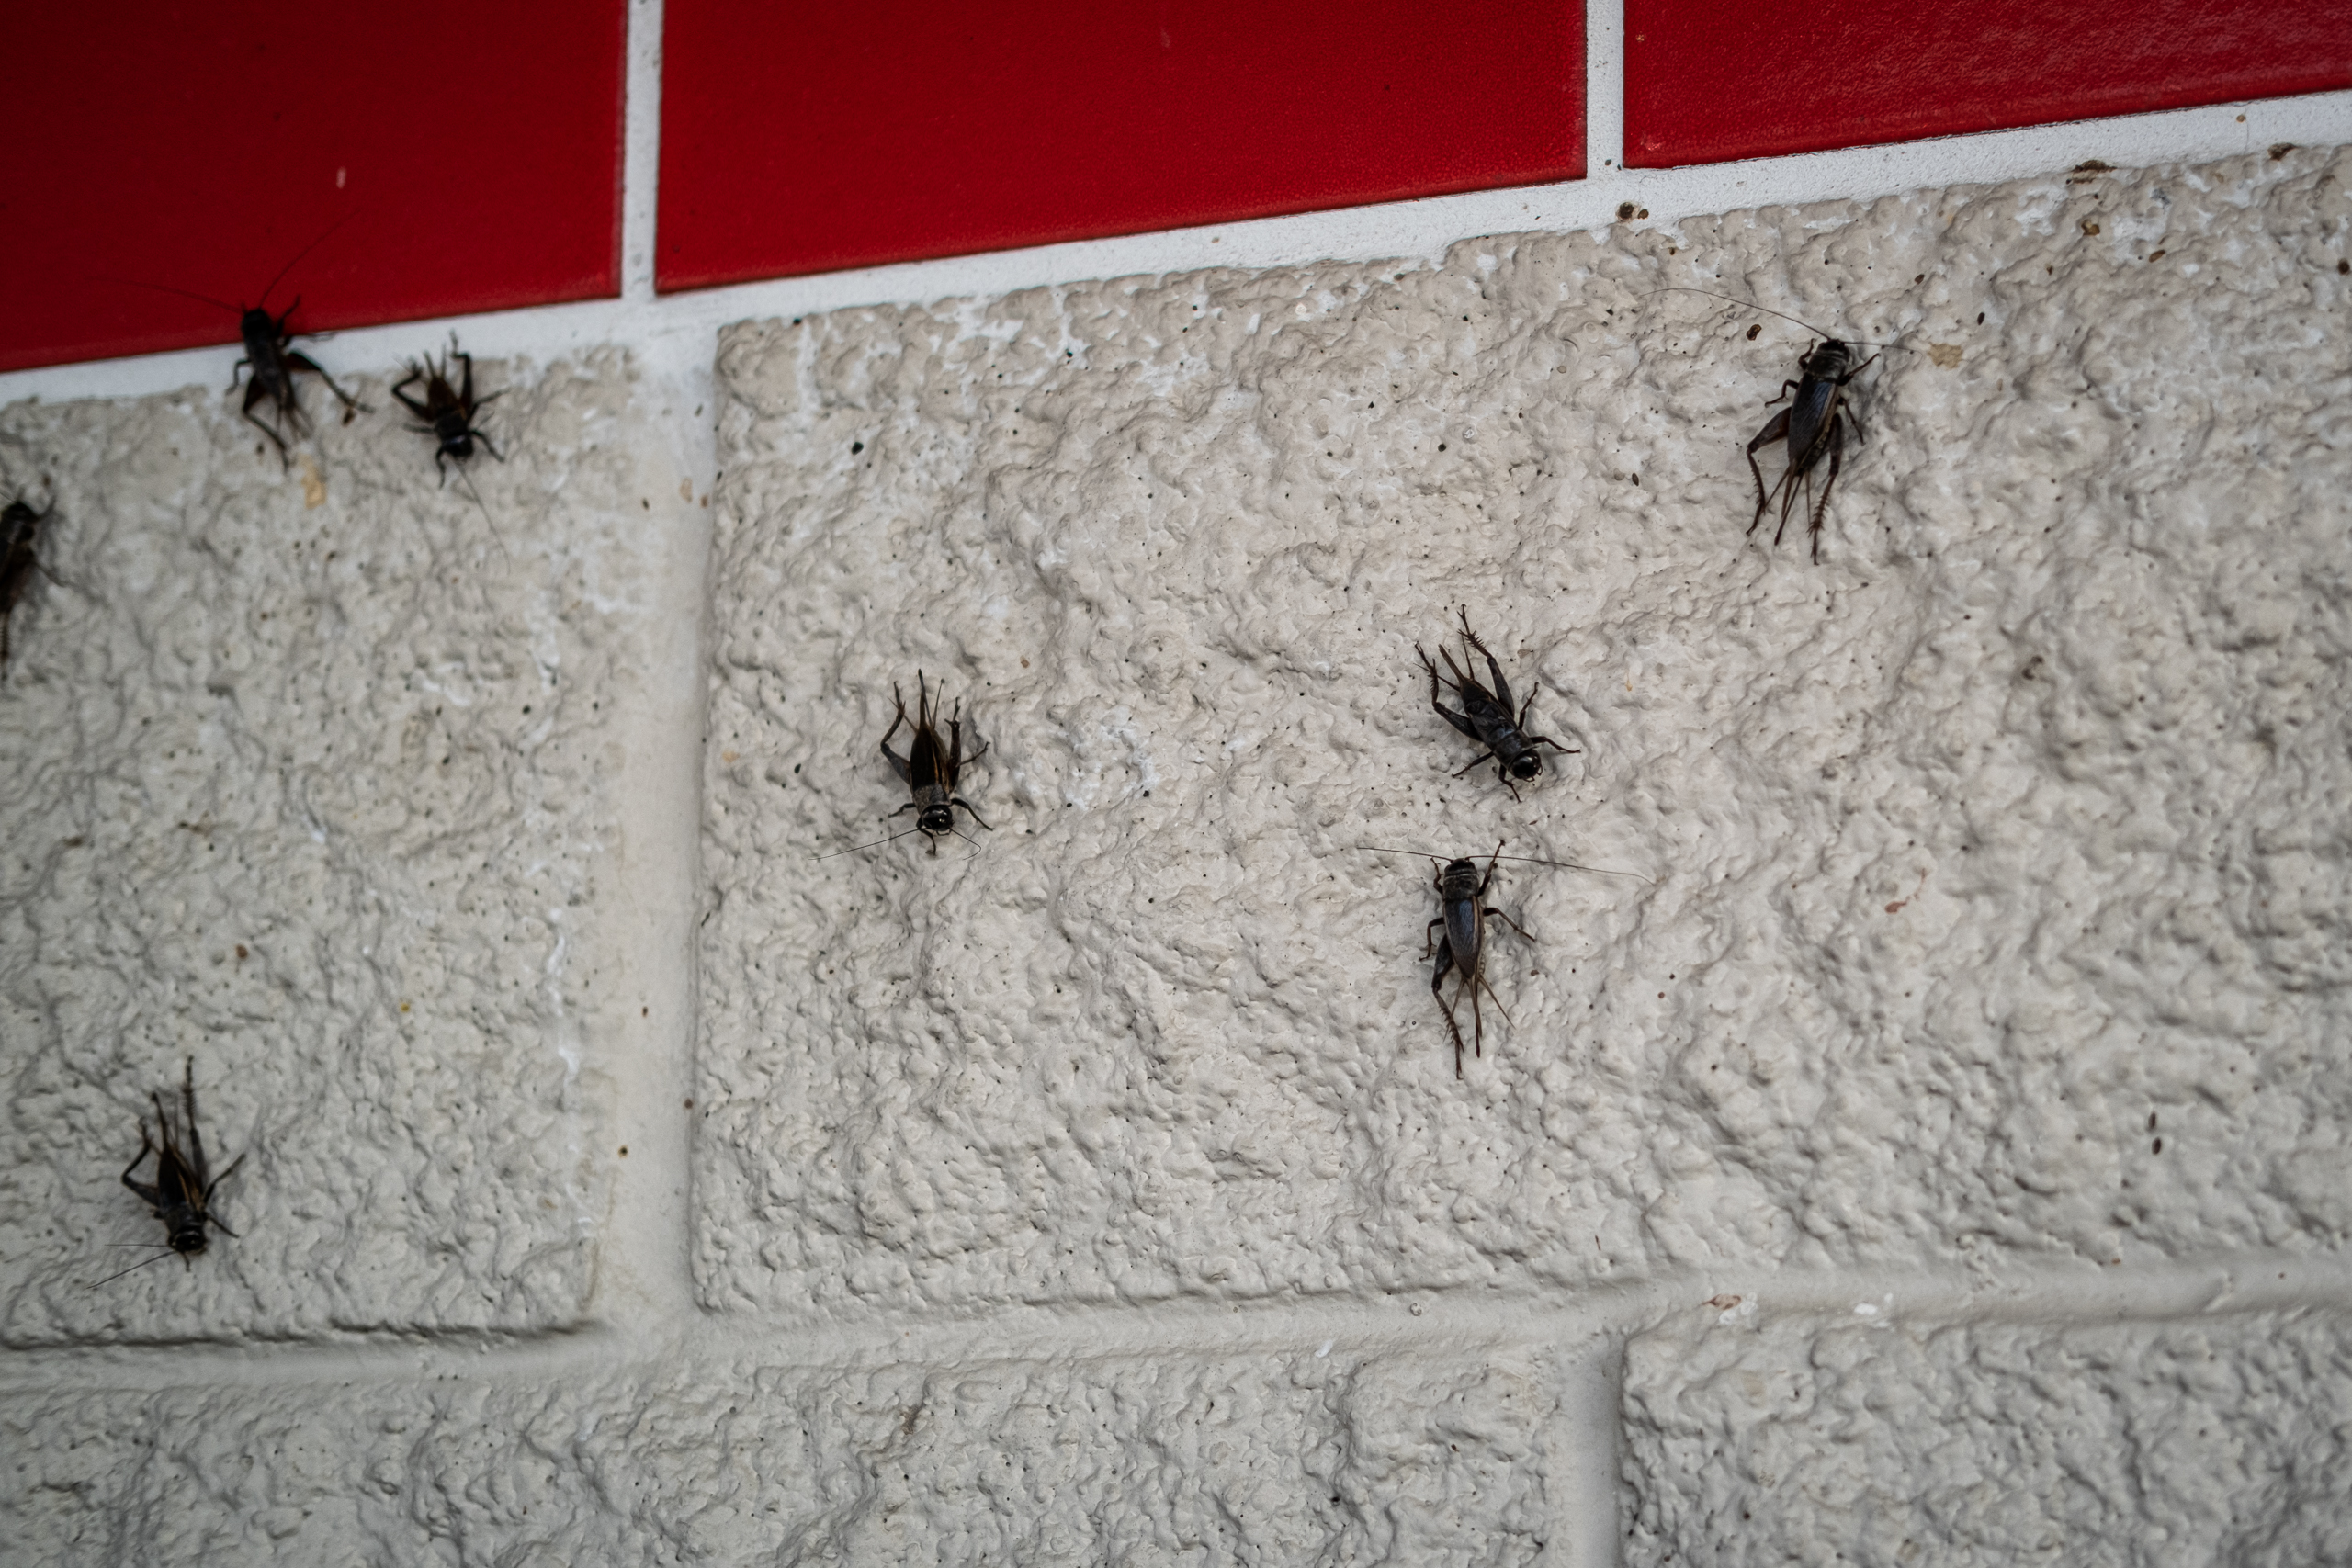 Black field crickets are seen on a gray block wall.